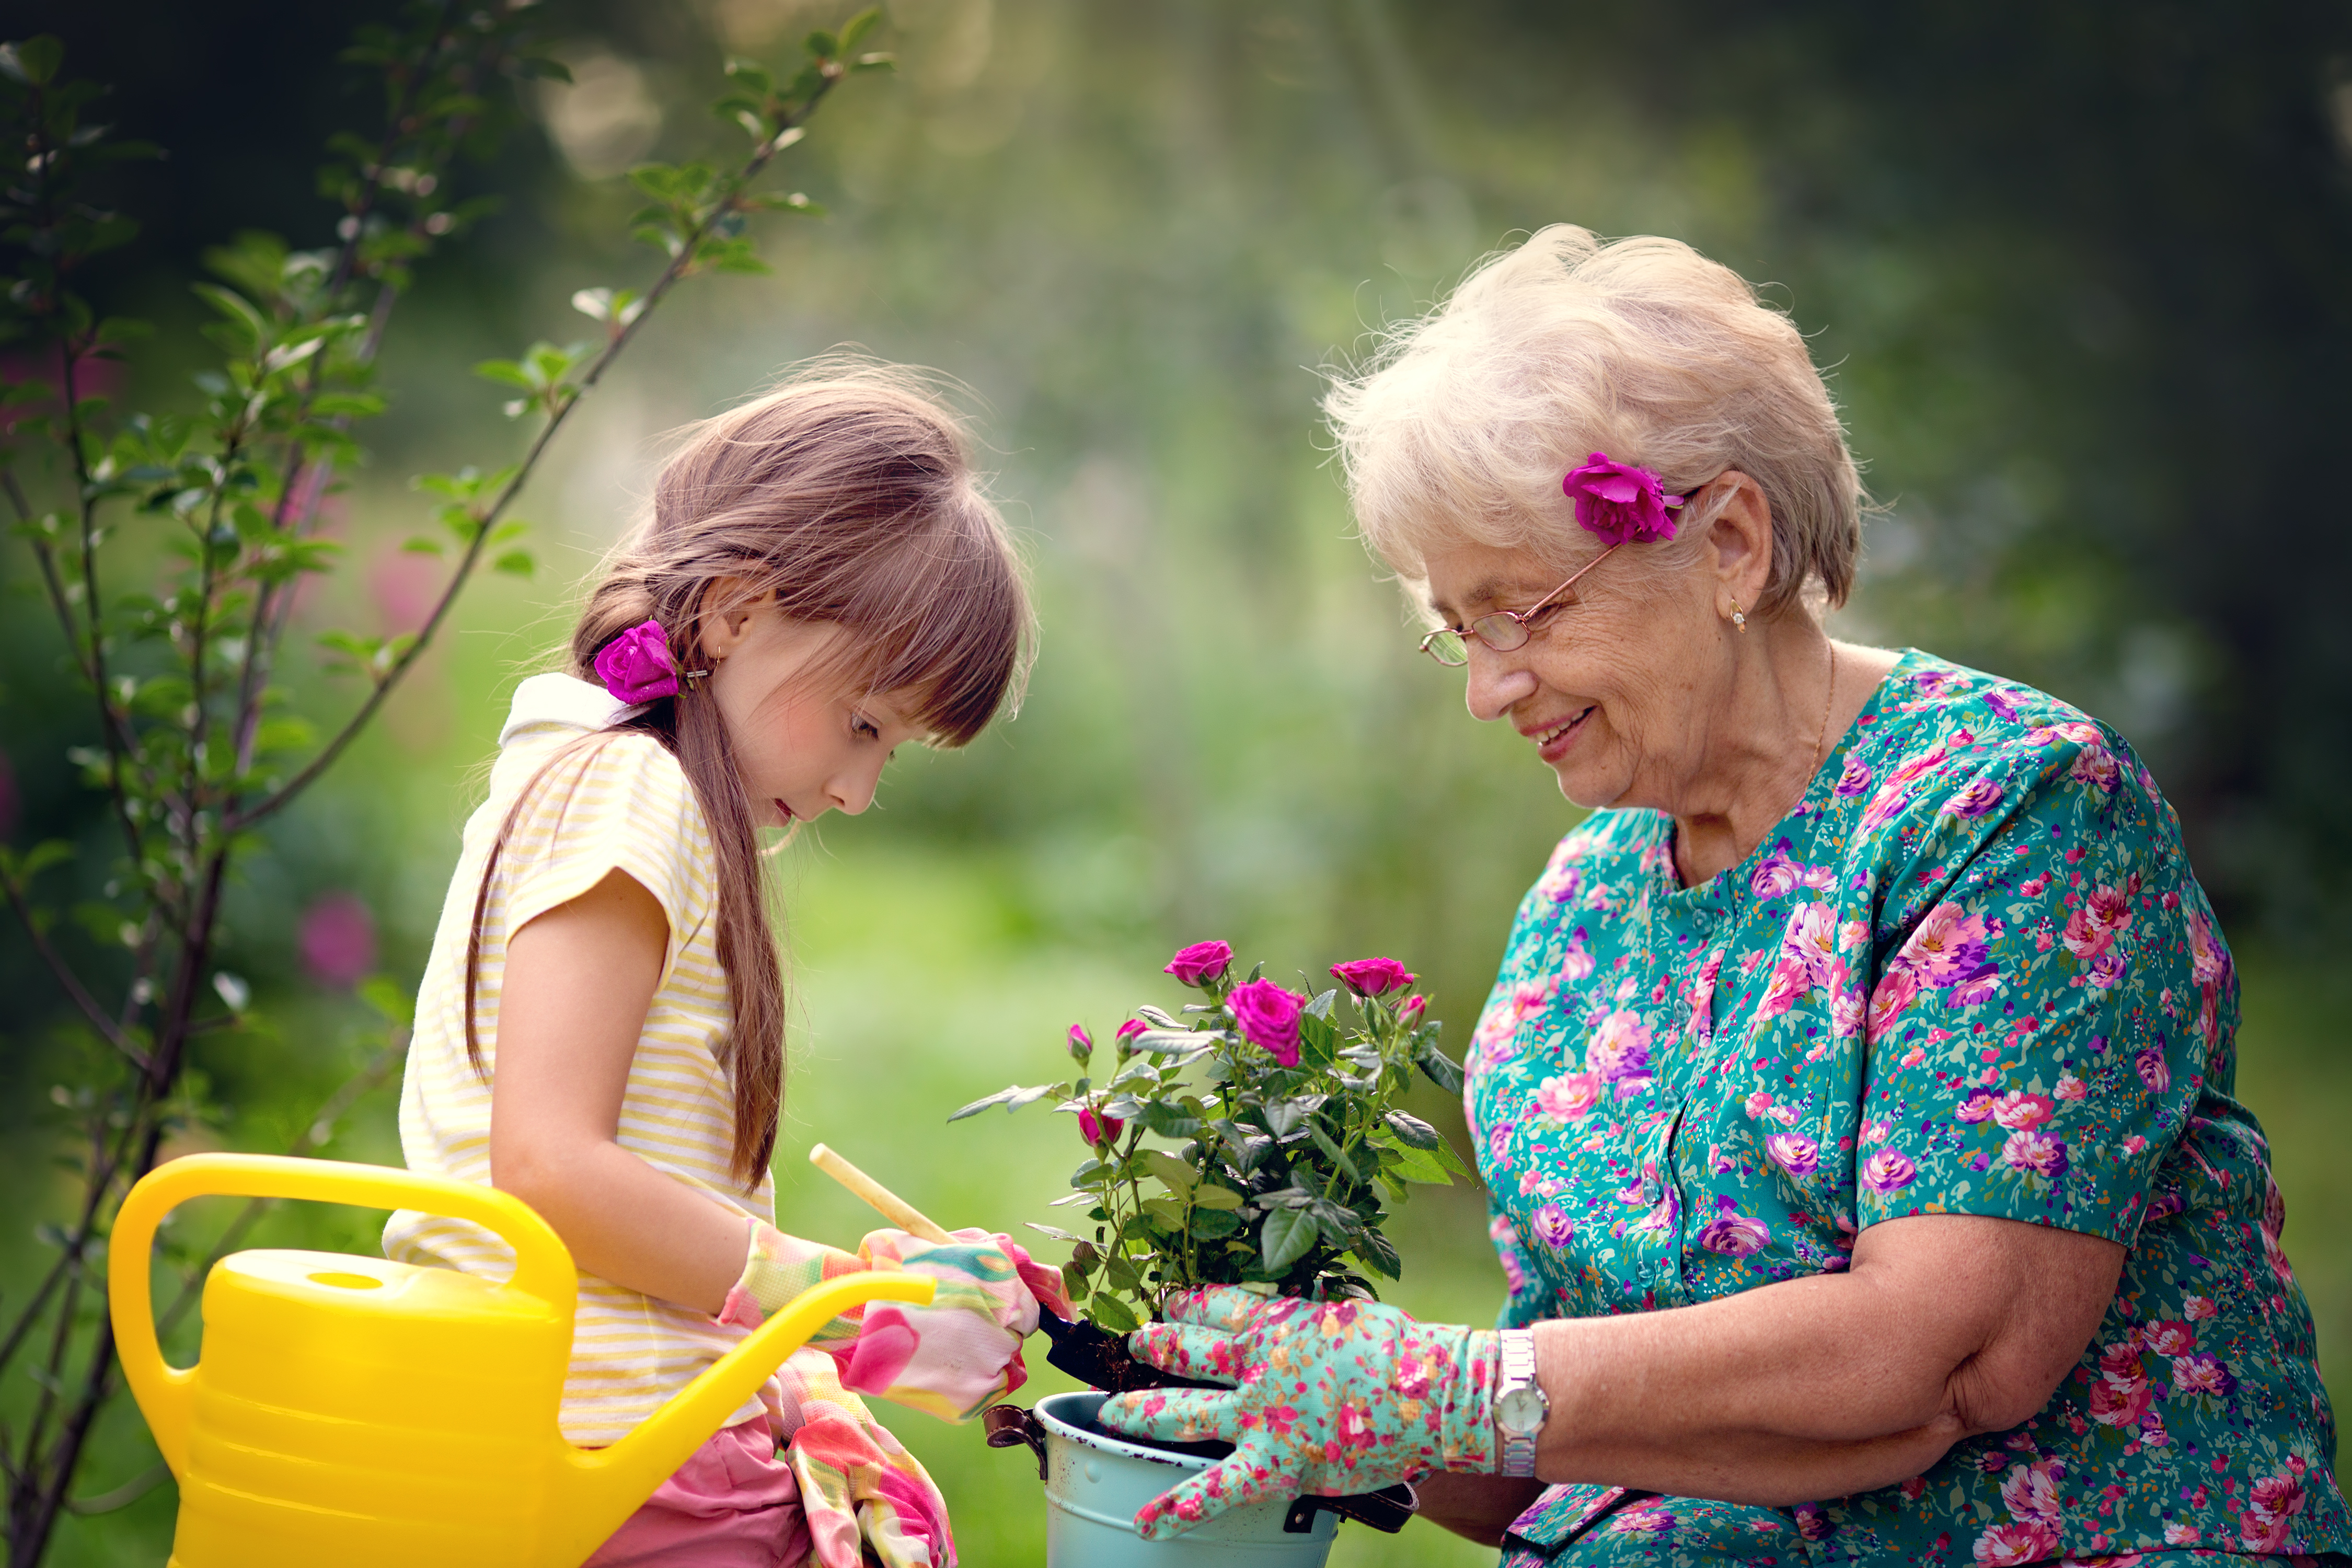 A happy grandmother works in the garden with her little granddaughter. | Source: Shutterstock